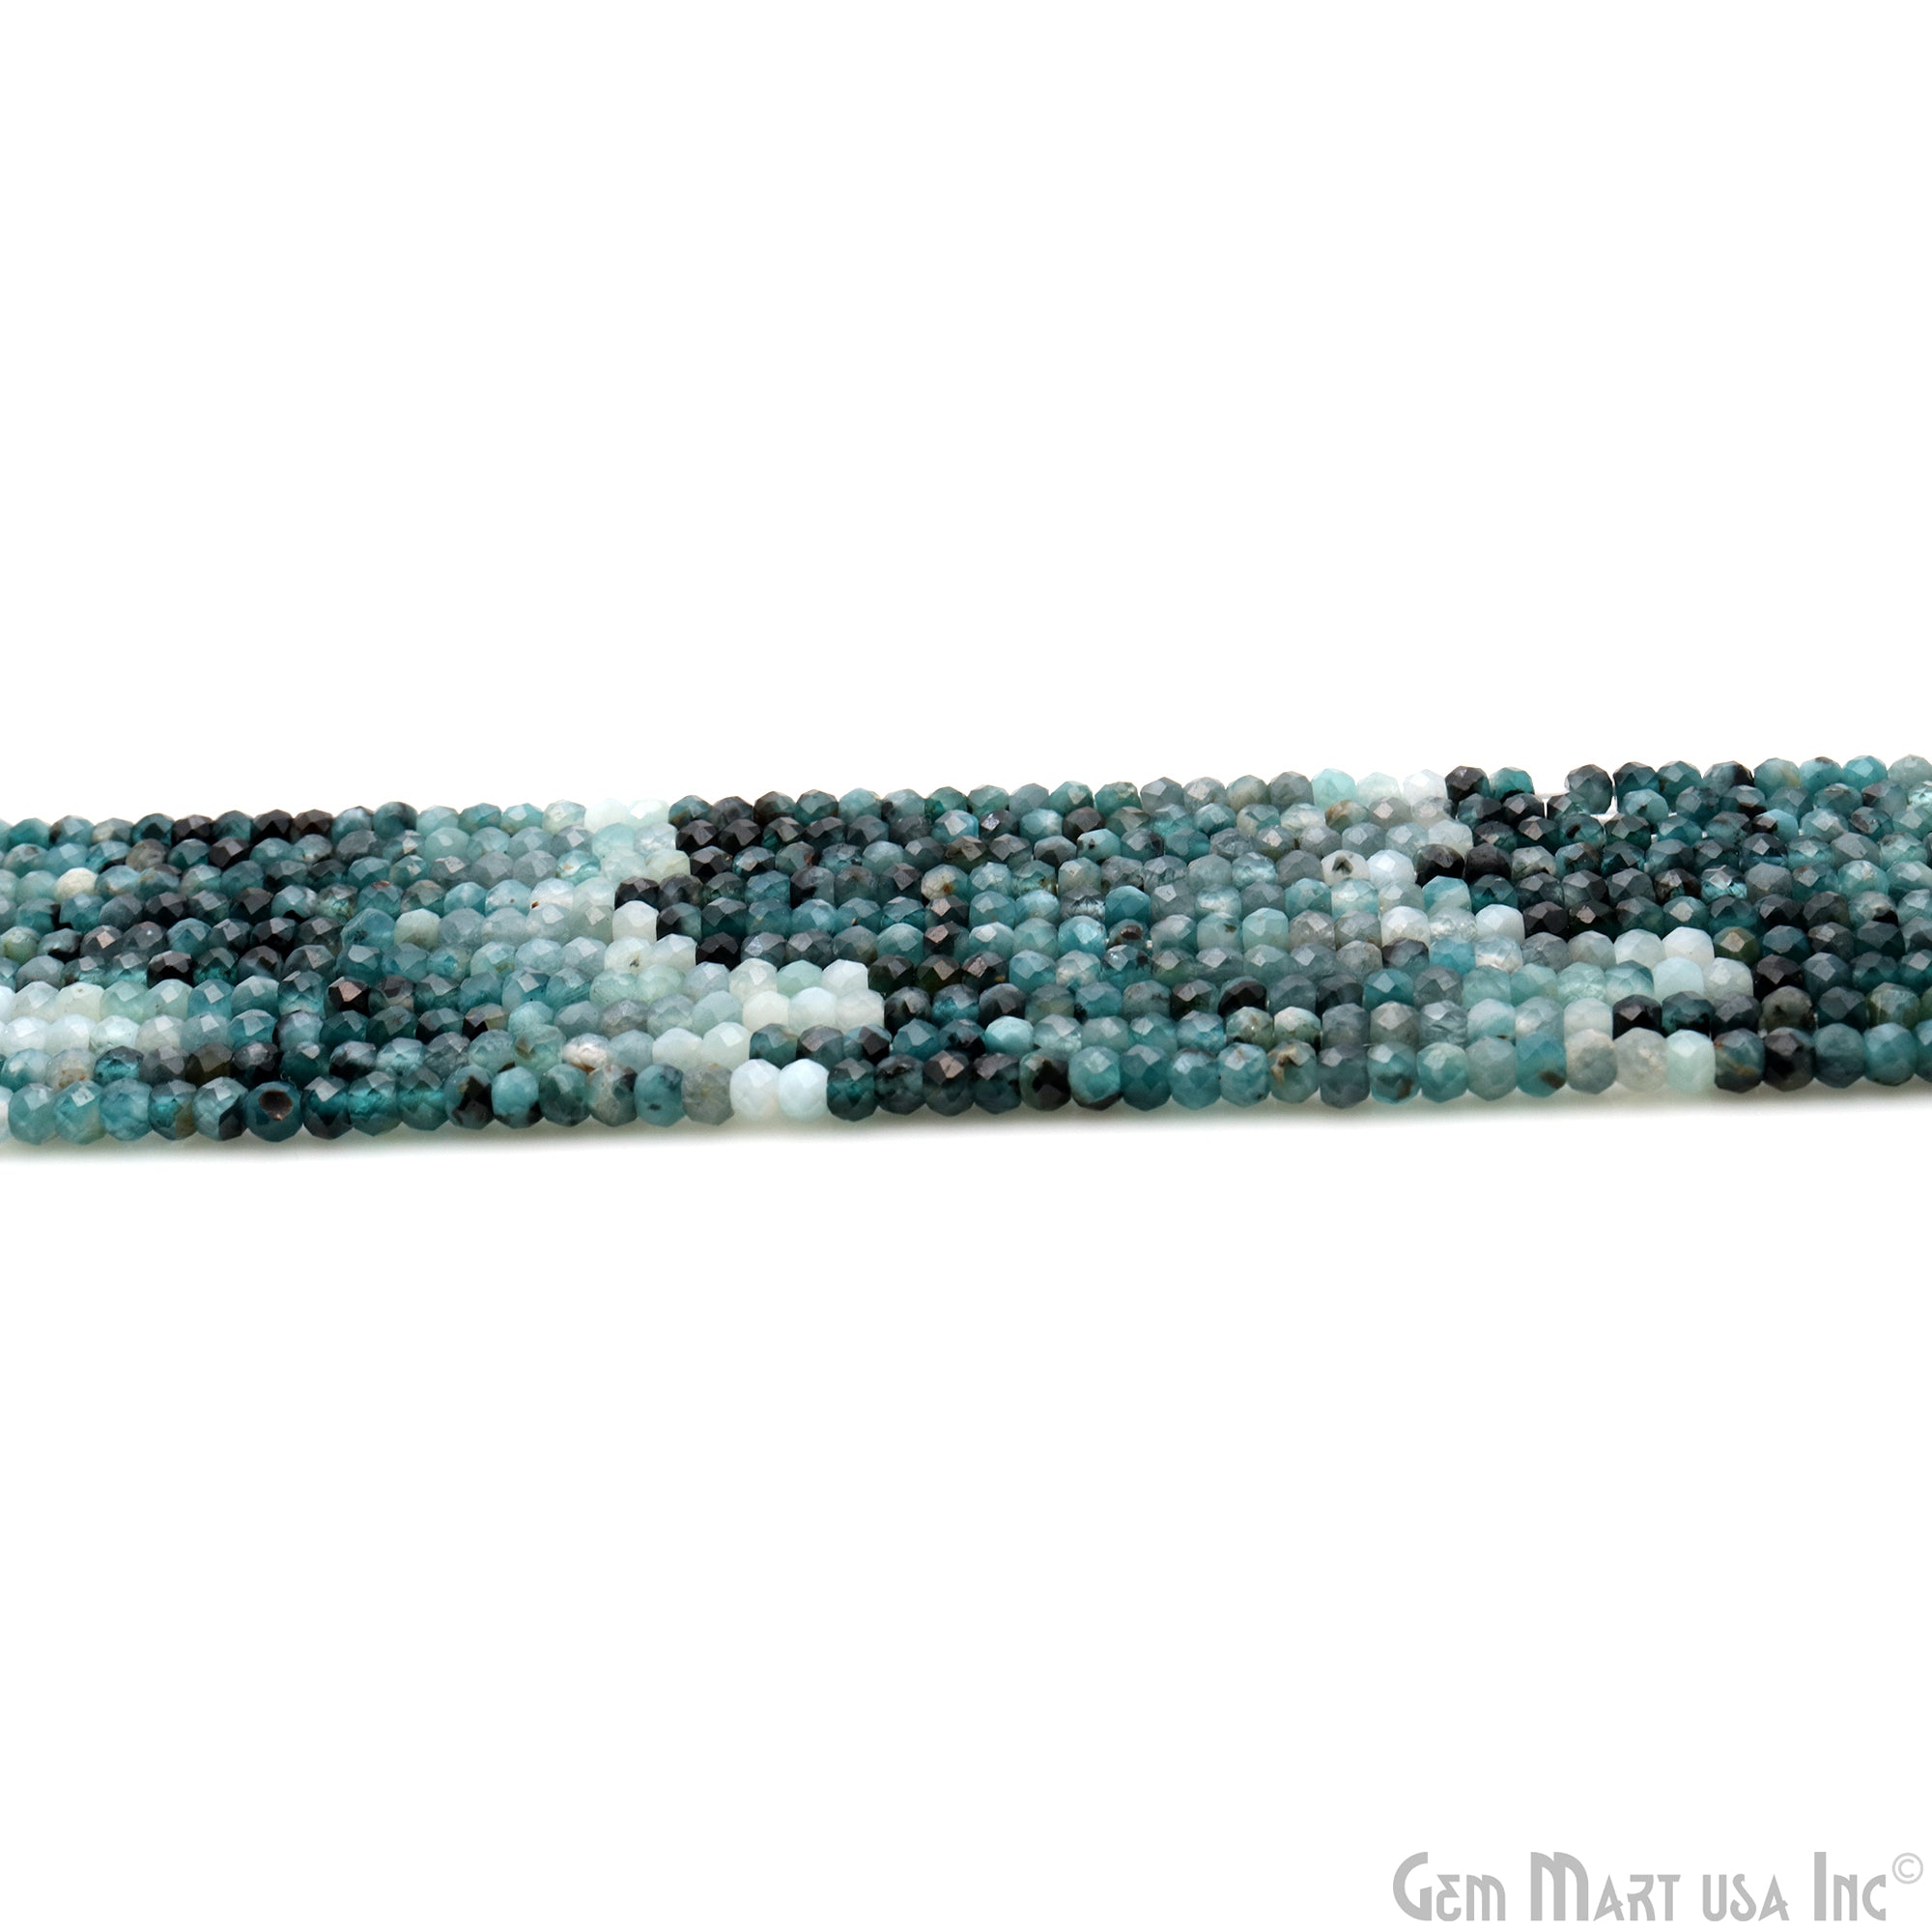 Emerald Shaded 3mm Faceted Gemstone Rondelle Beads 1 Strand